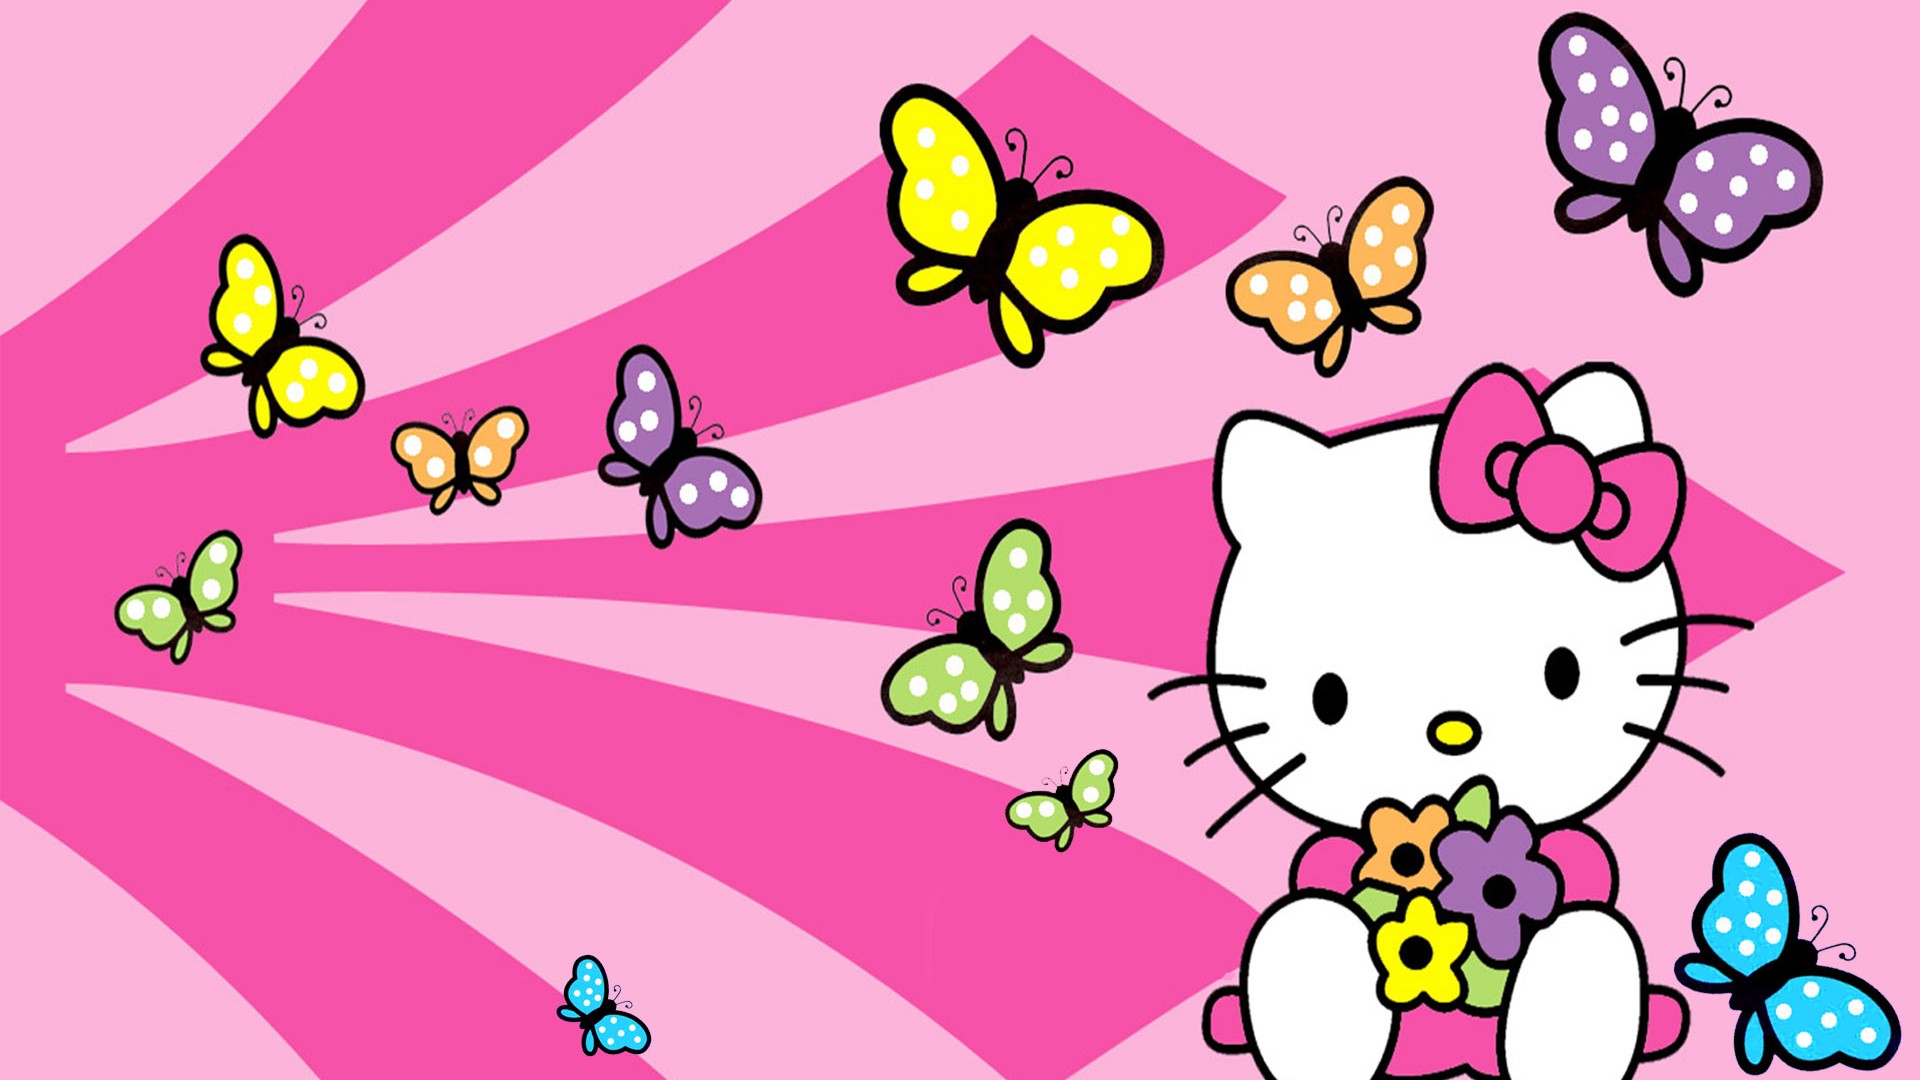 HD Wallpaper Sanrio Hello Kitty With Resolution 1920X1080 pixel. You can make this wallpaper for your Desktop Computer Backgrounds, Mac Wallpapers, Android Lock screen or iPhone Screensavers